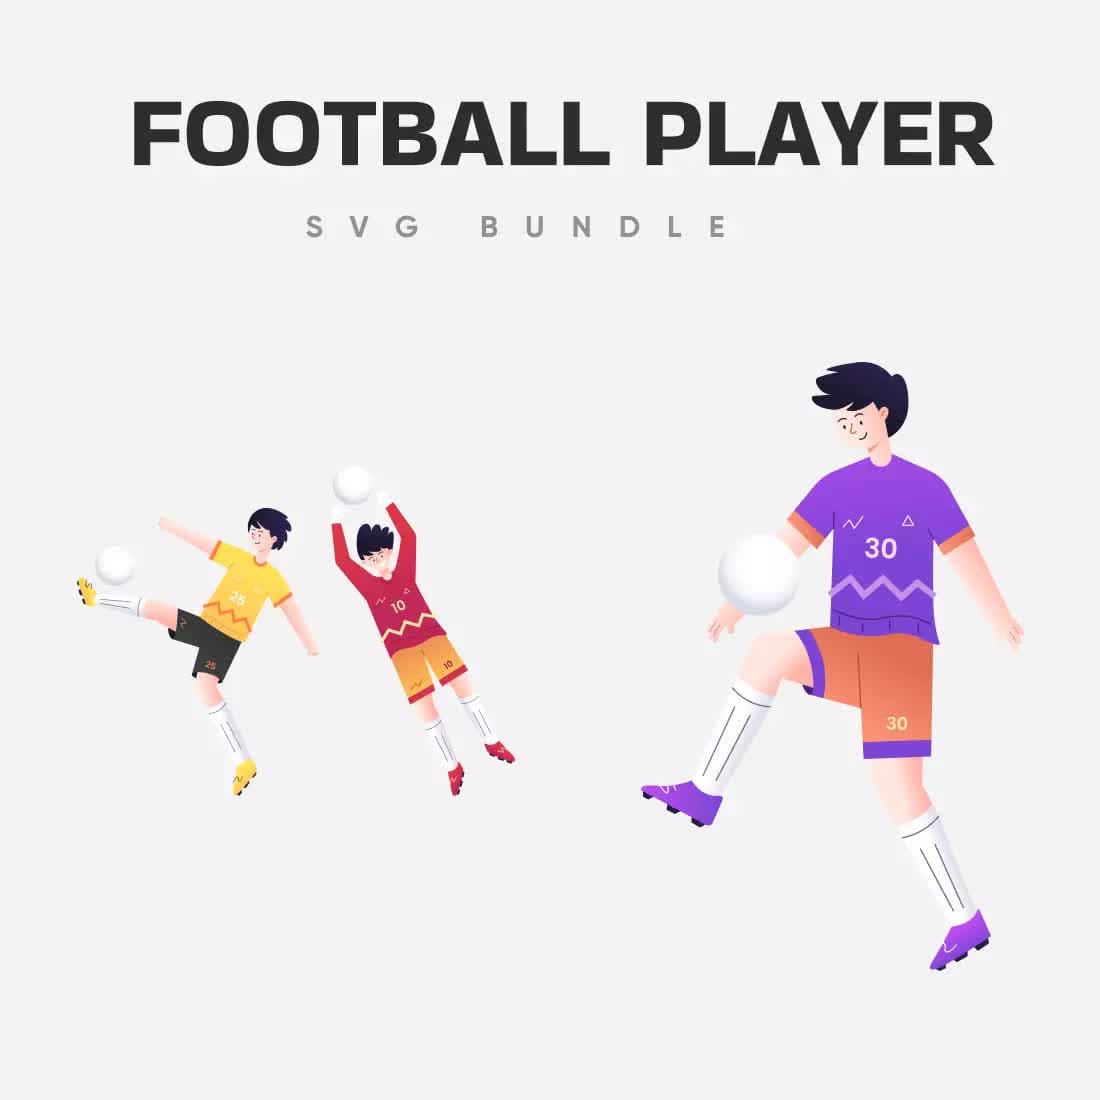 Football Player SVG Bundle Preview 5.